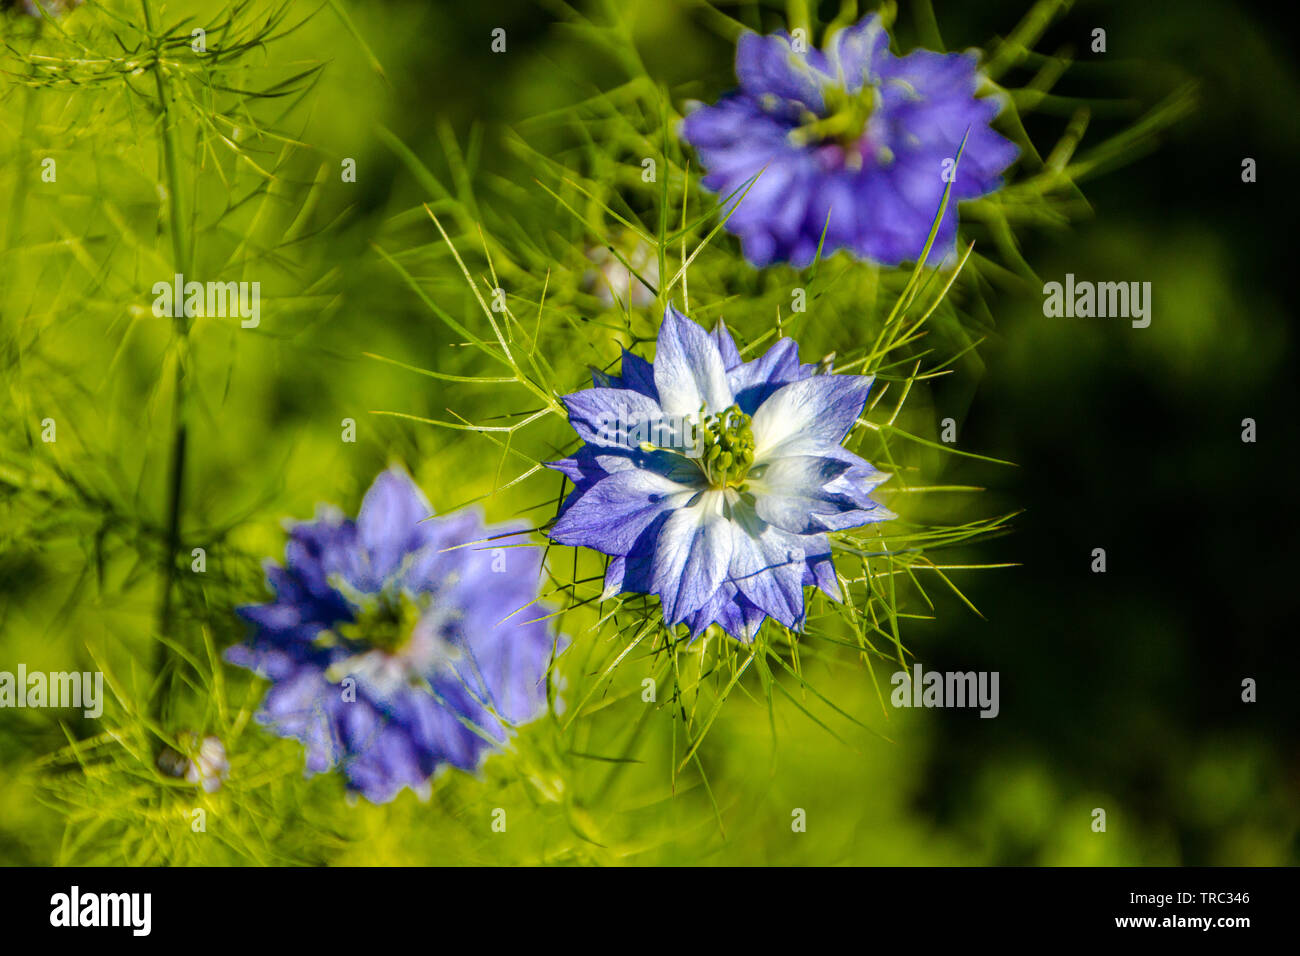 Close up of ragged lady flowers (Latin: Nigella Damascena, family of Ranunculaceae). Damascenine is a toxic alkaloid that can be found in the seeds of Stock Photo